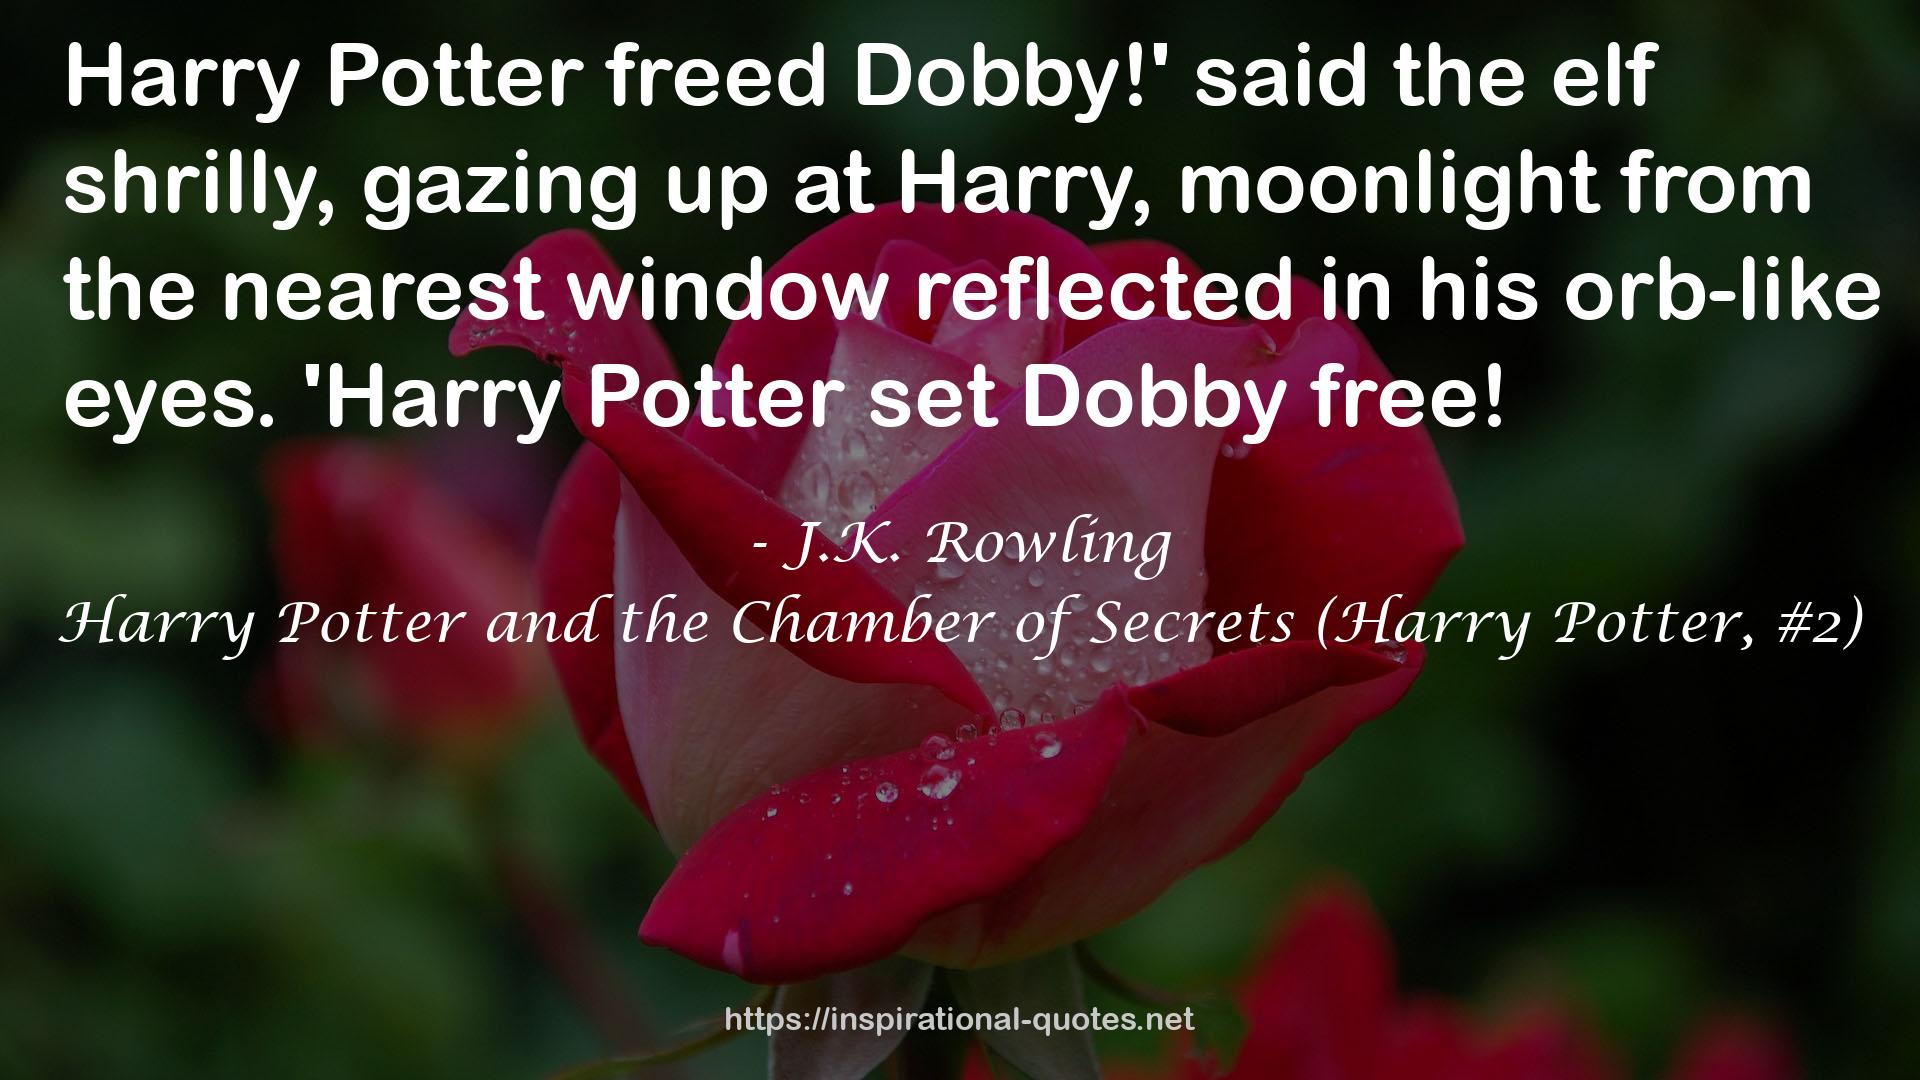 Harry Potter and the Chamber of Secrets (Harry Potter, #2) QUOTES